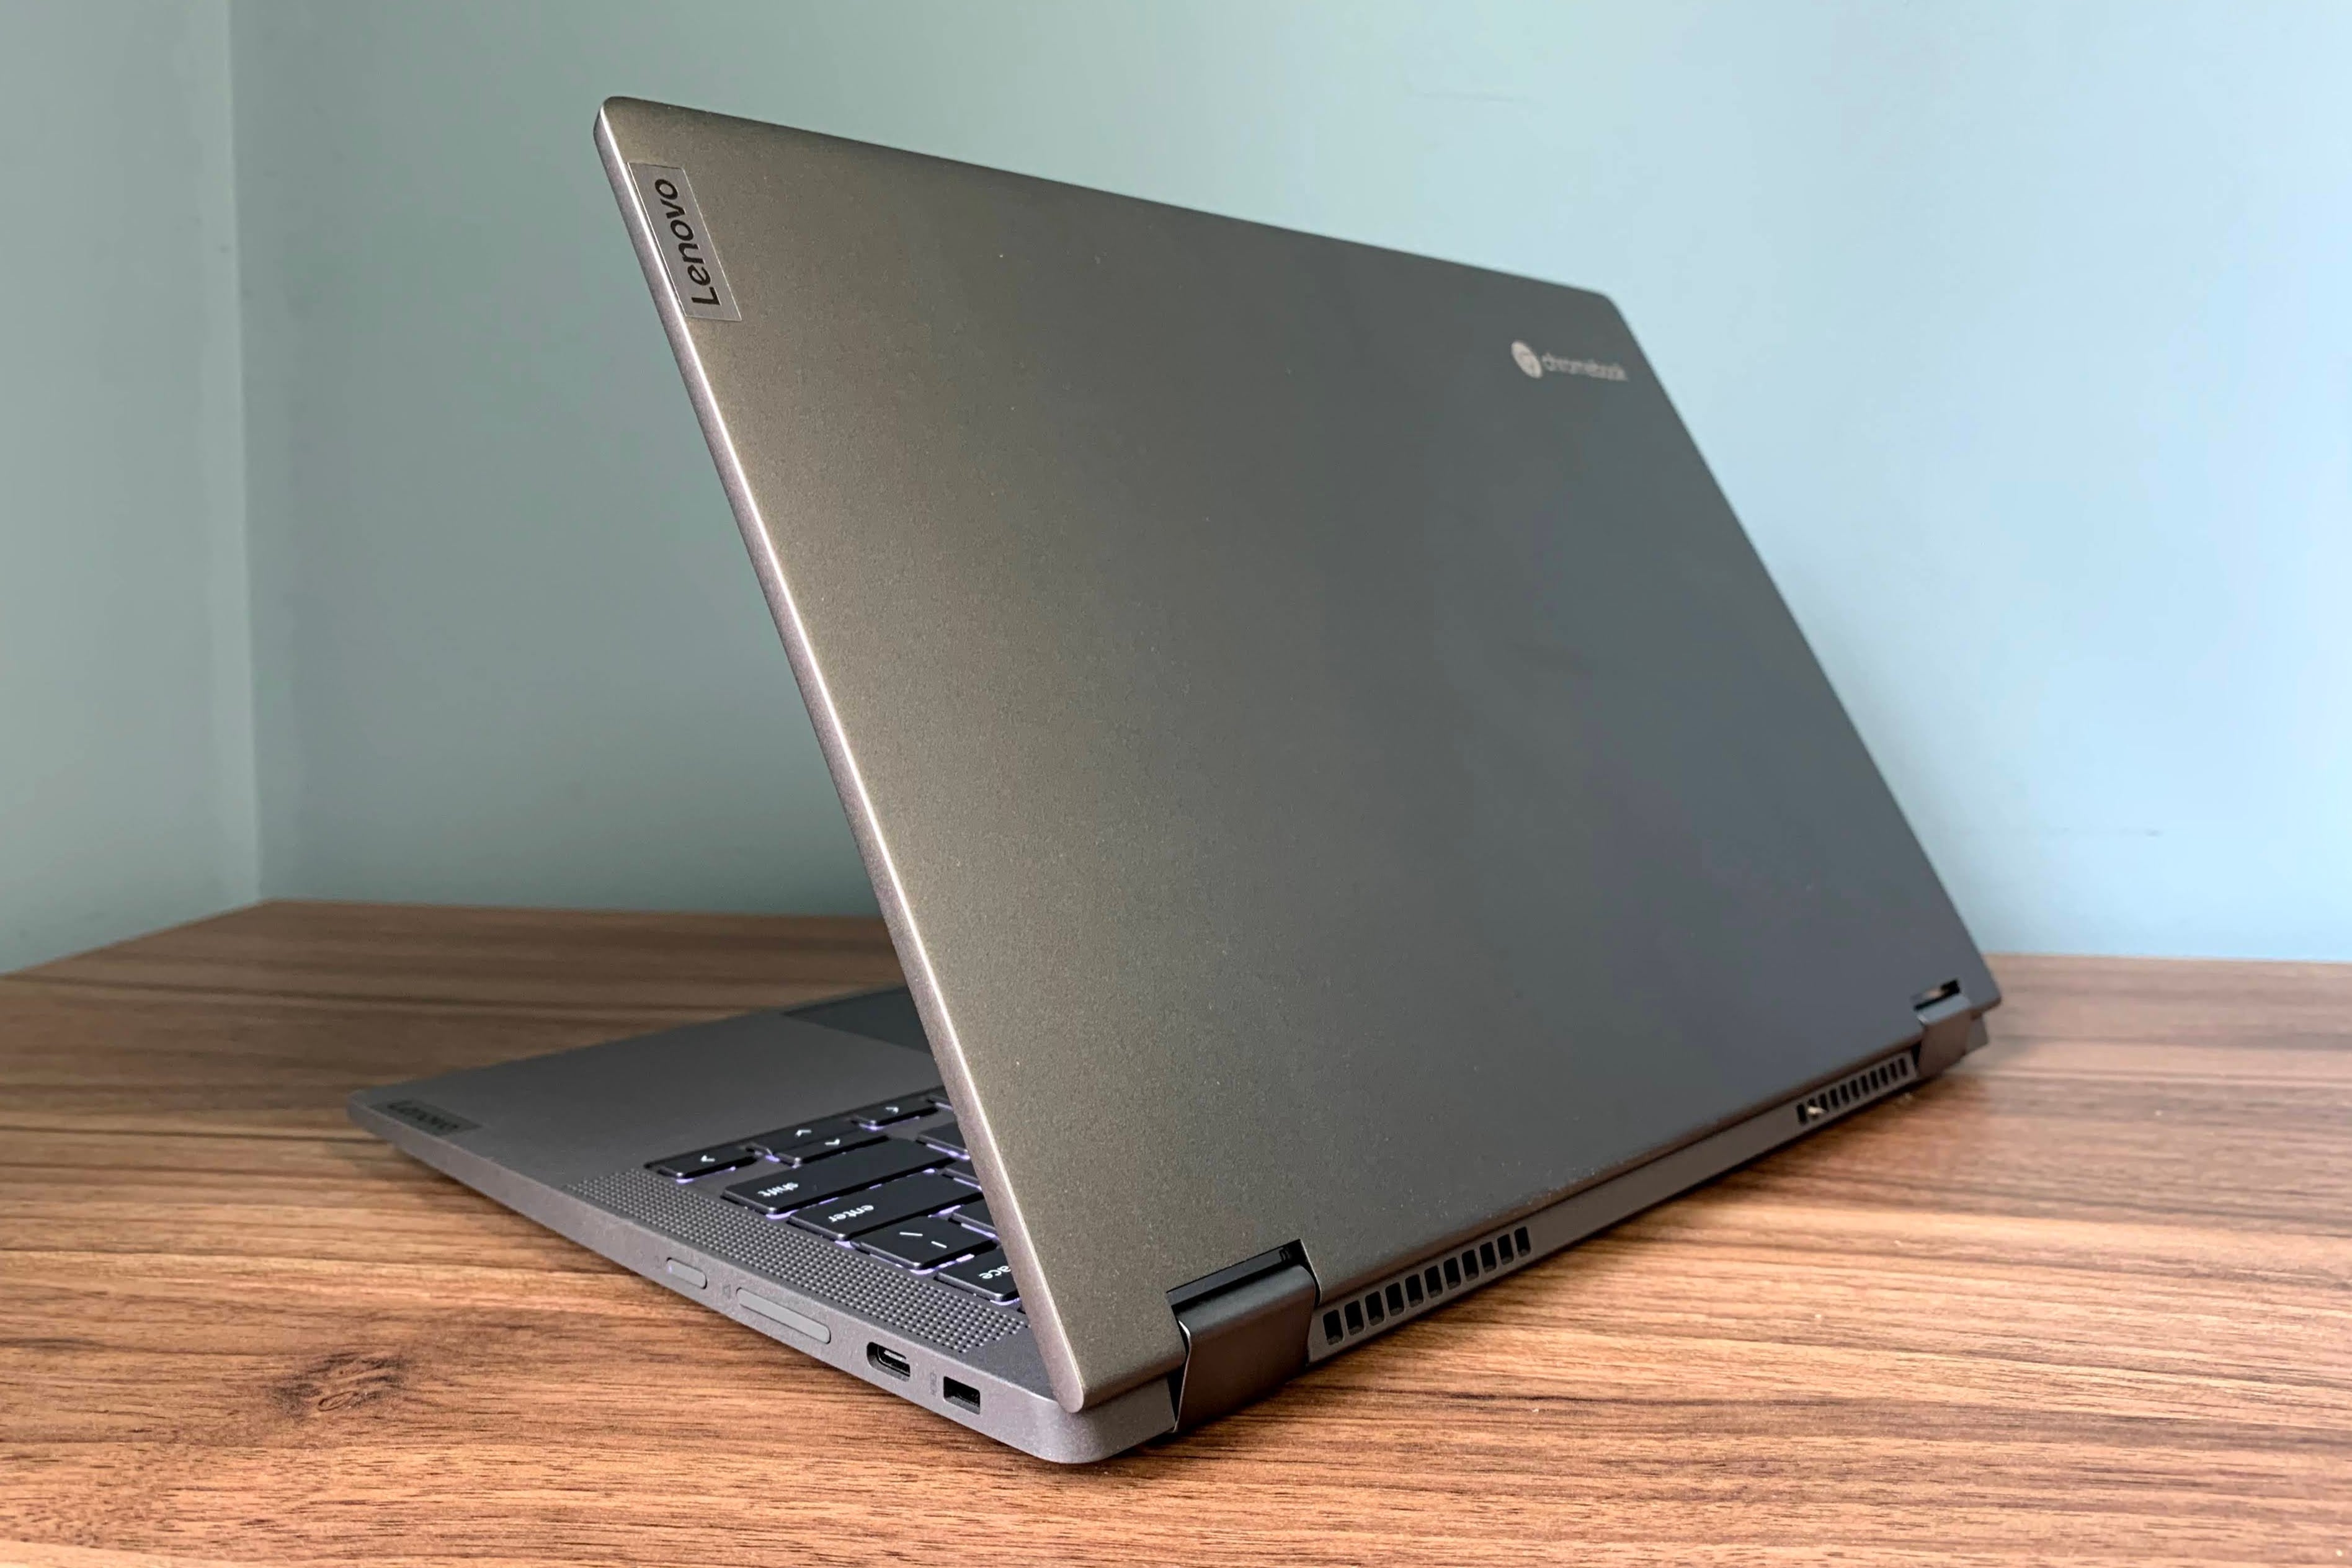 Lenovo Flex 5 Chromebook review: An affordable 2-in-1 for school or